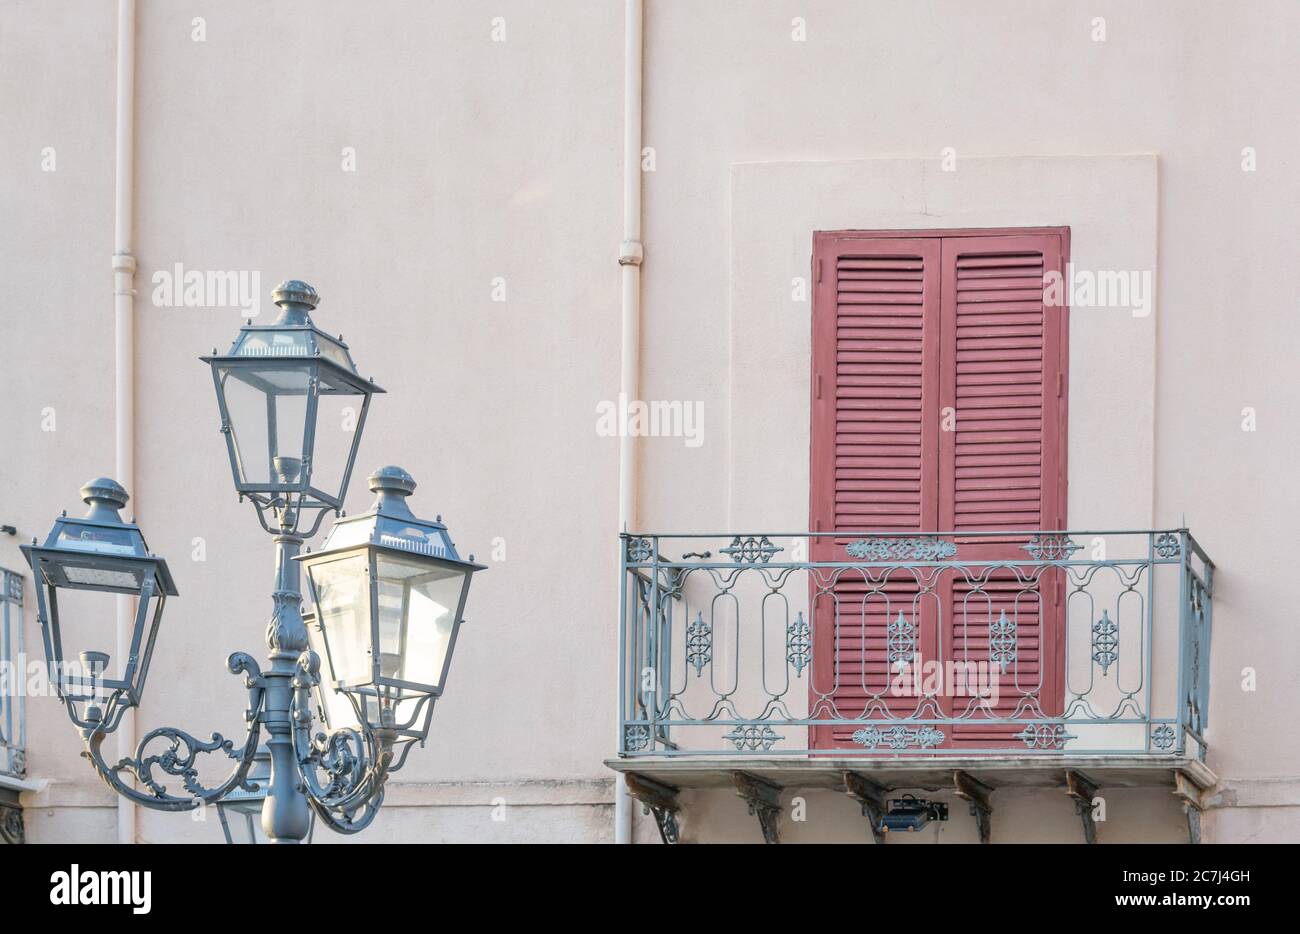 View of the balcony and lantern in Sicily Stock Photo